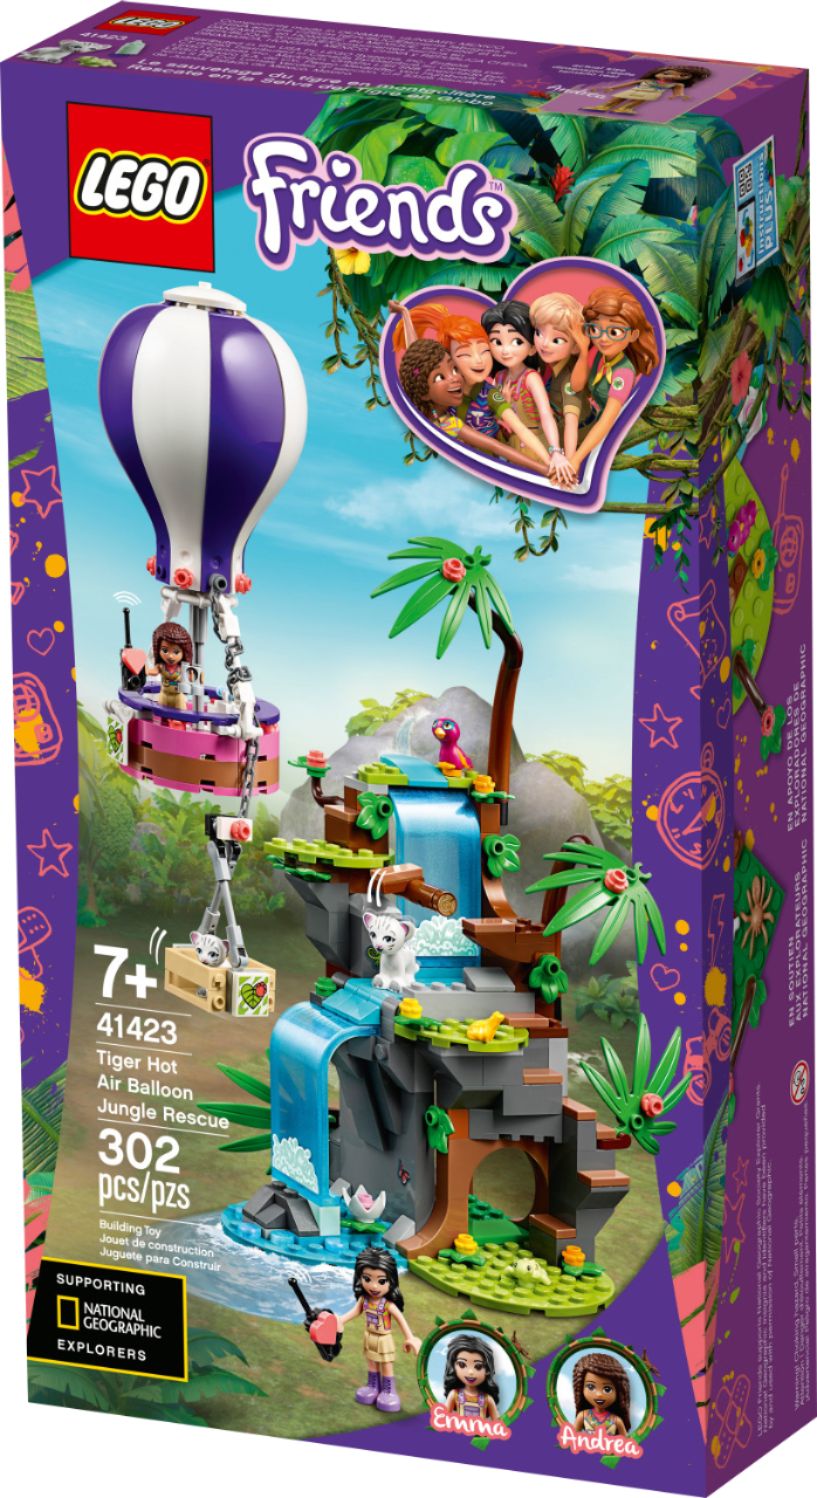 Best Buy: LEGO Friends Tiger Hot Air Balloon Jungle Rescue 41423 6289209